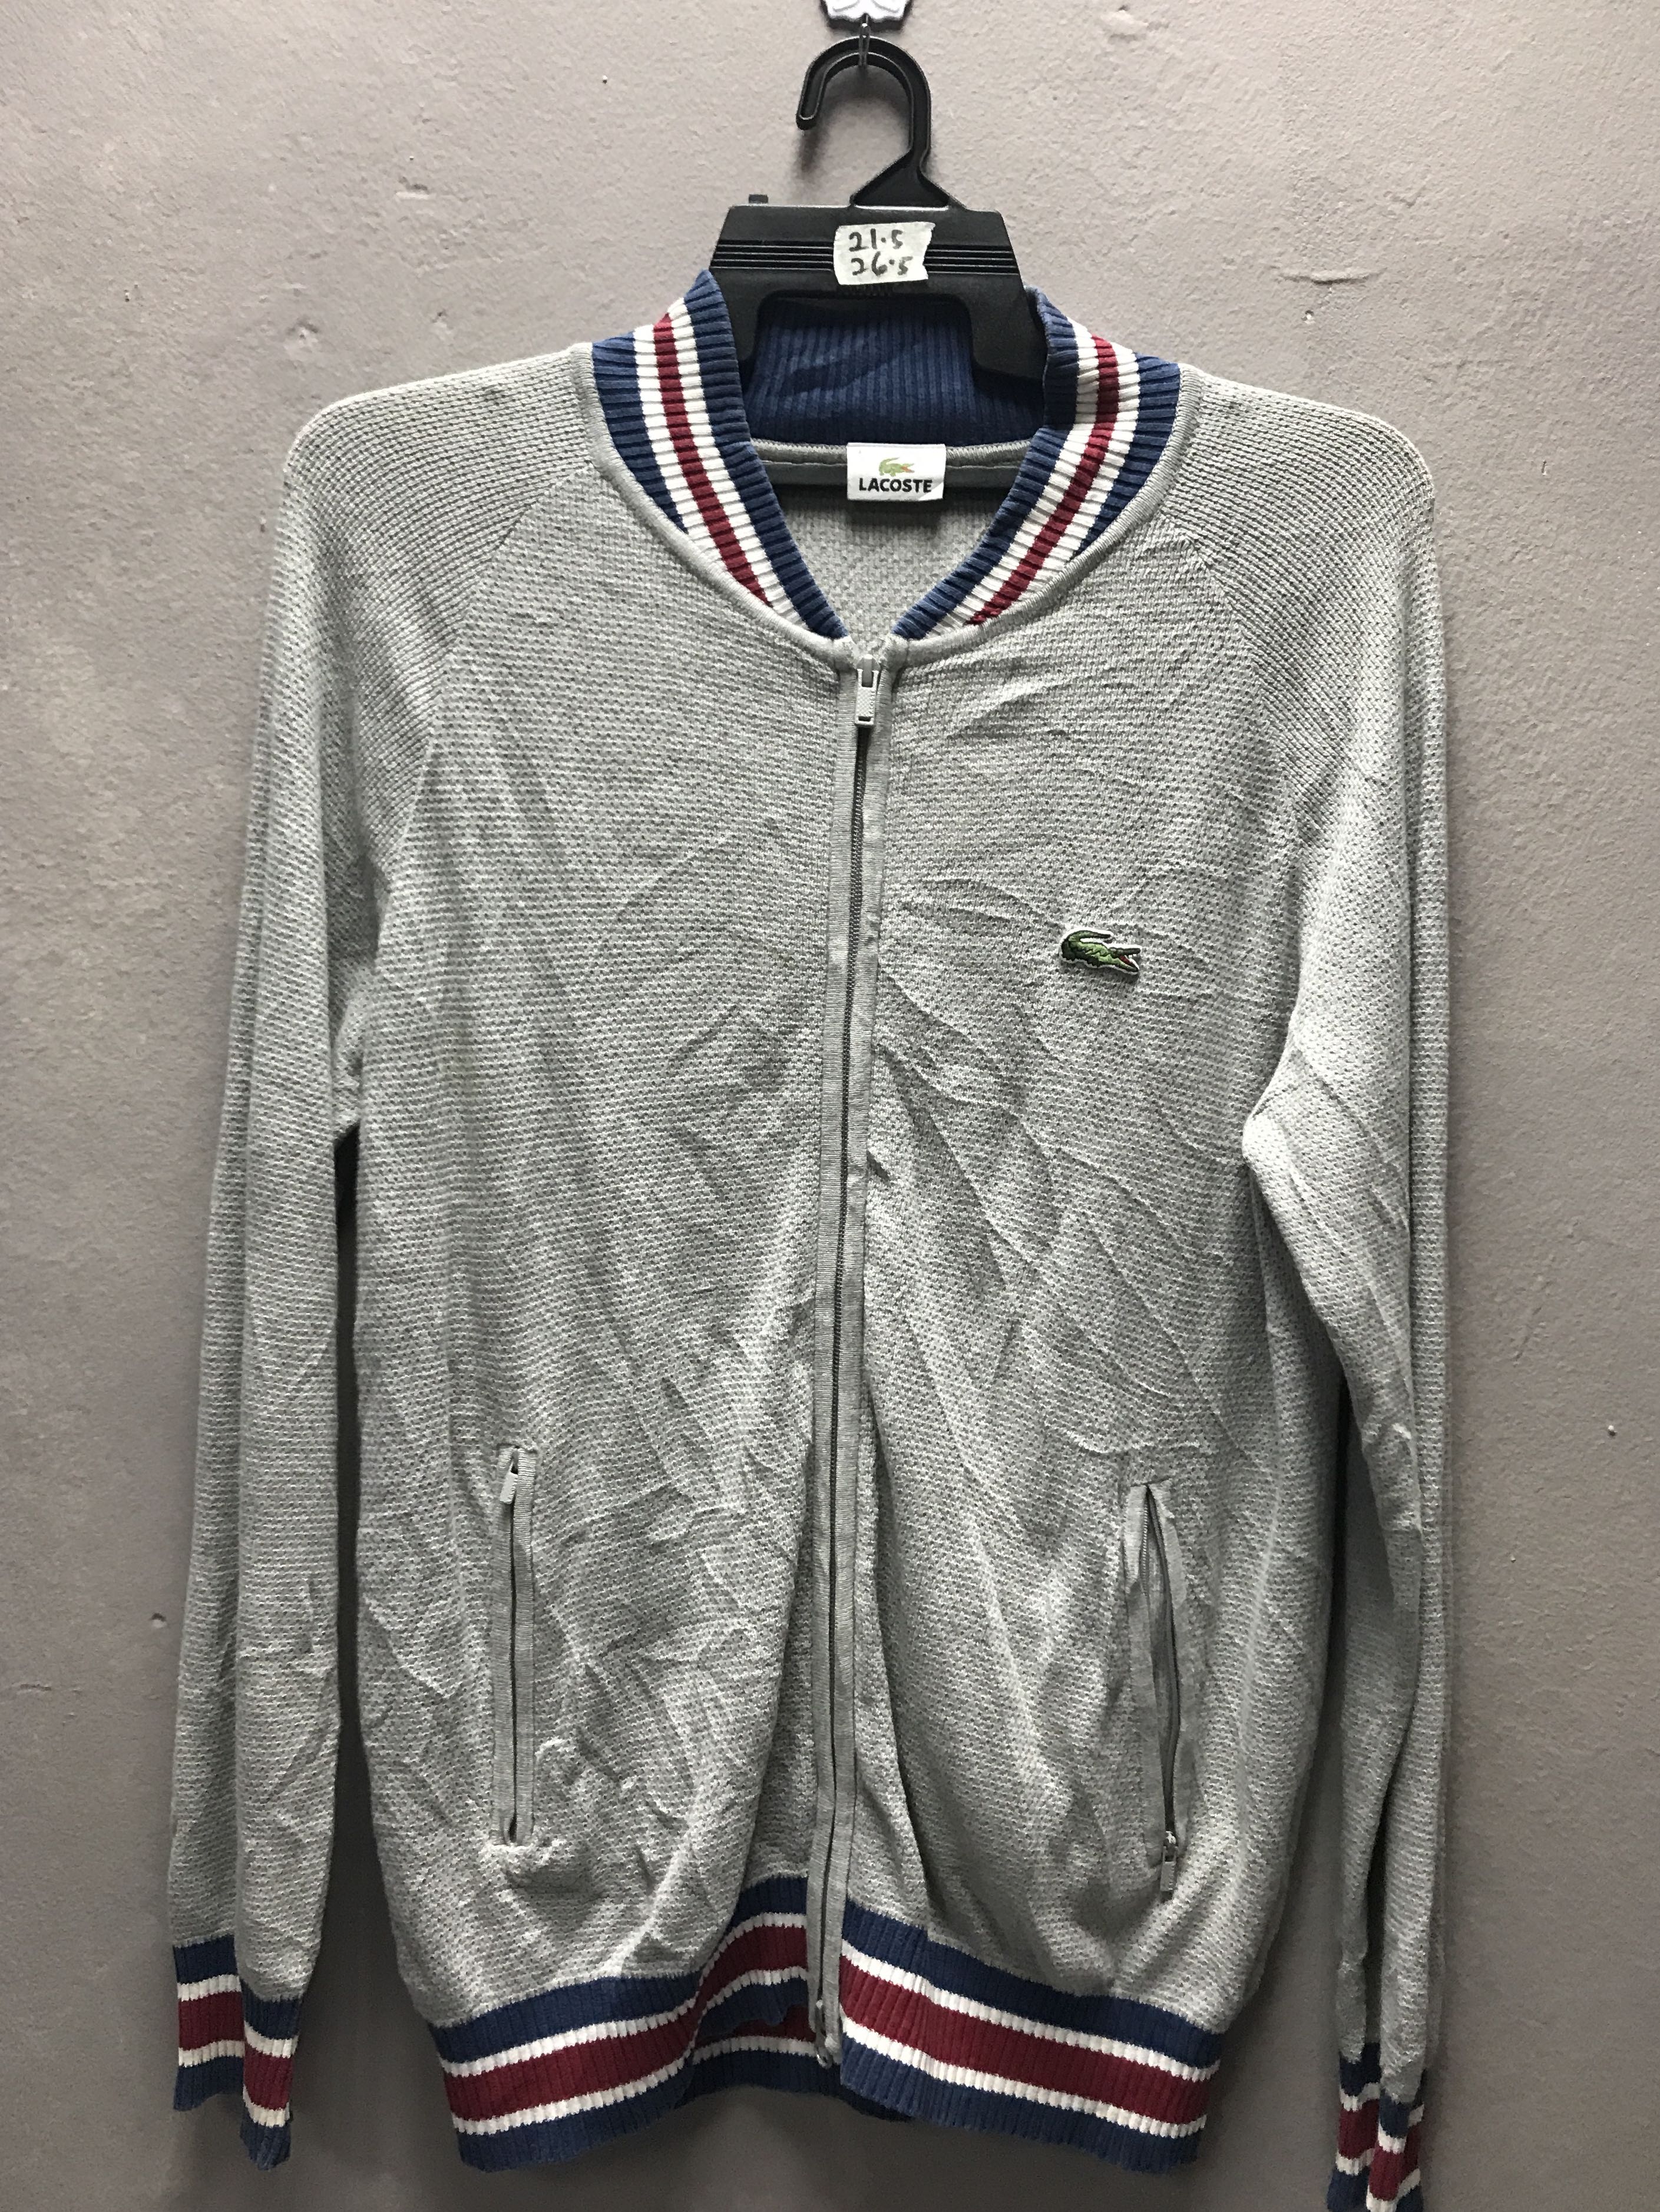 Lacoste varsity jacket Excellent condition,